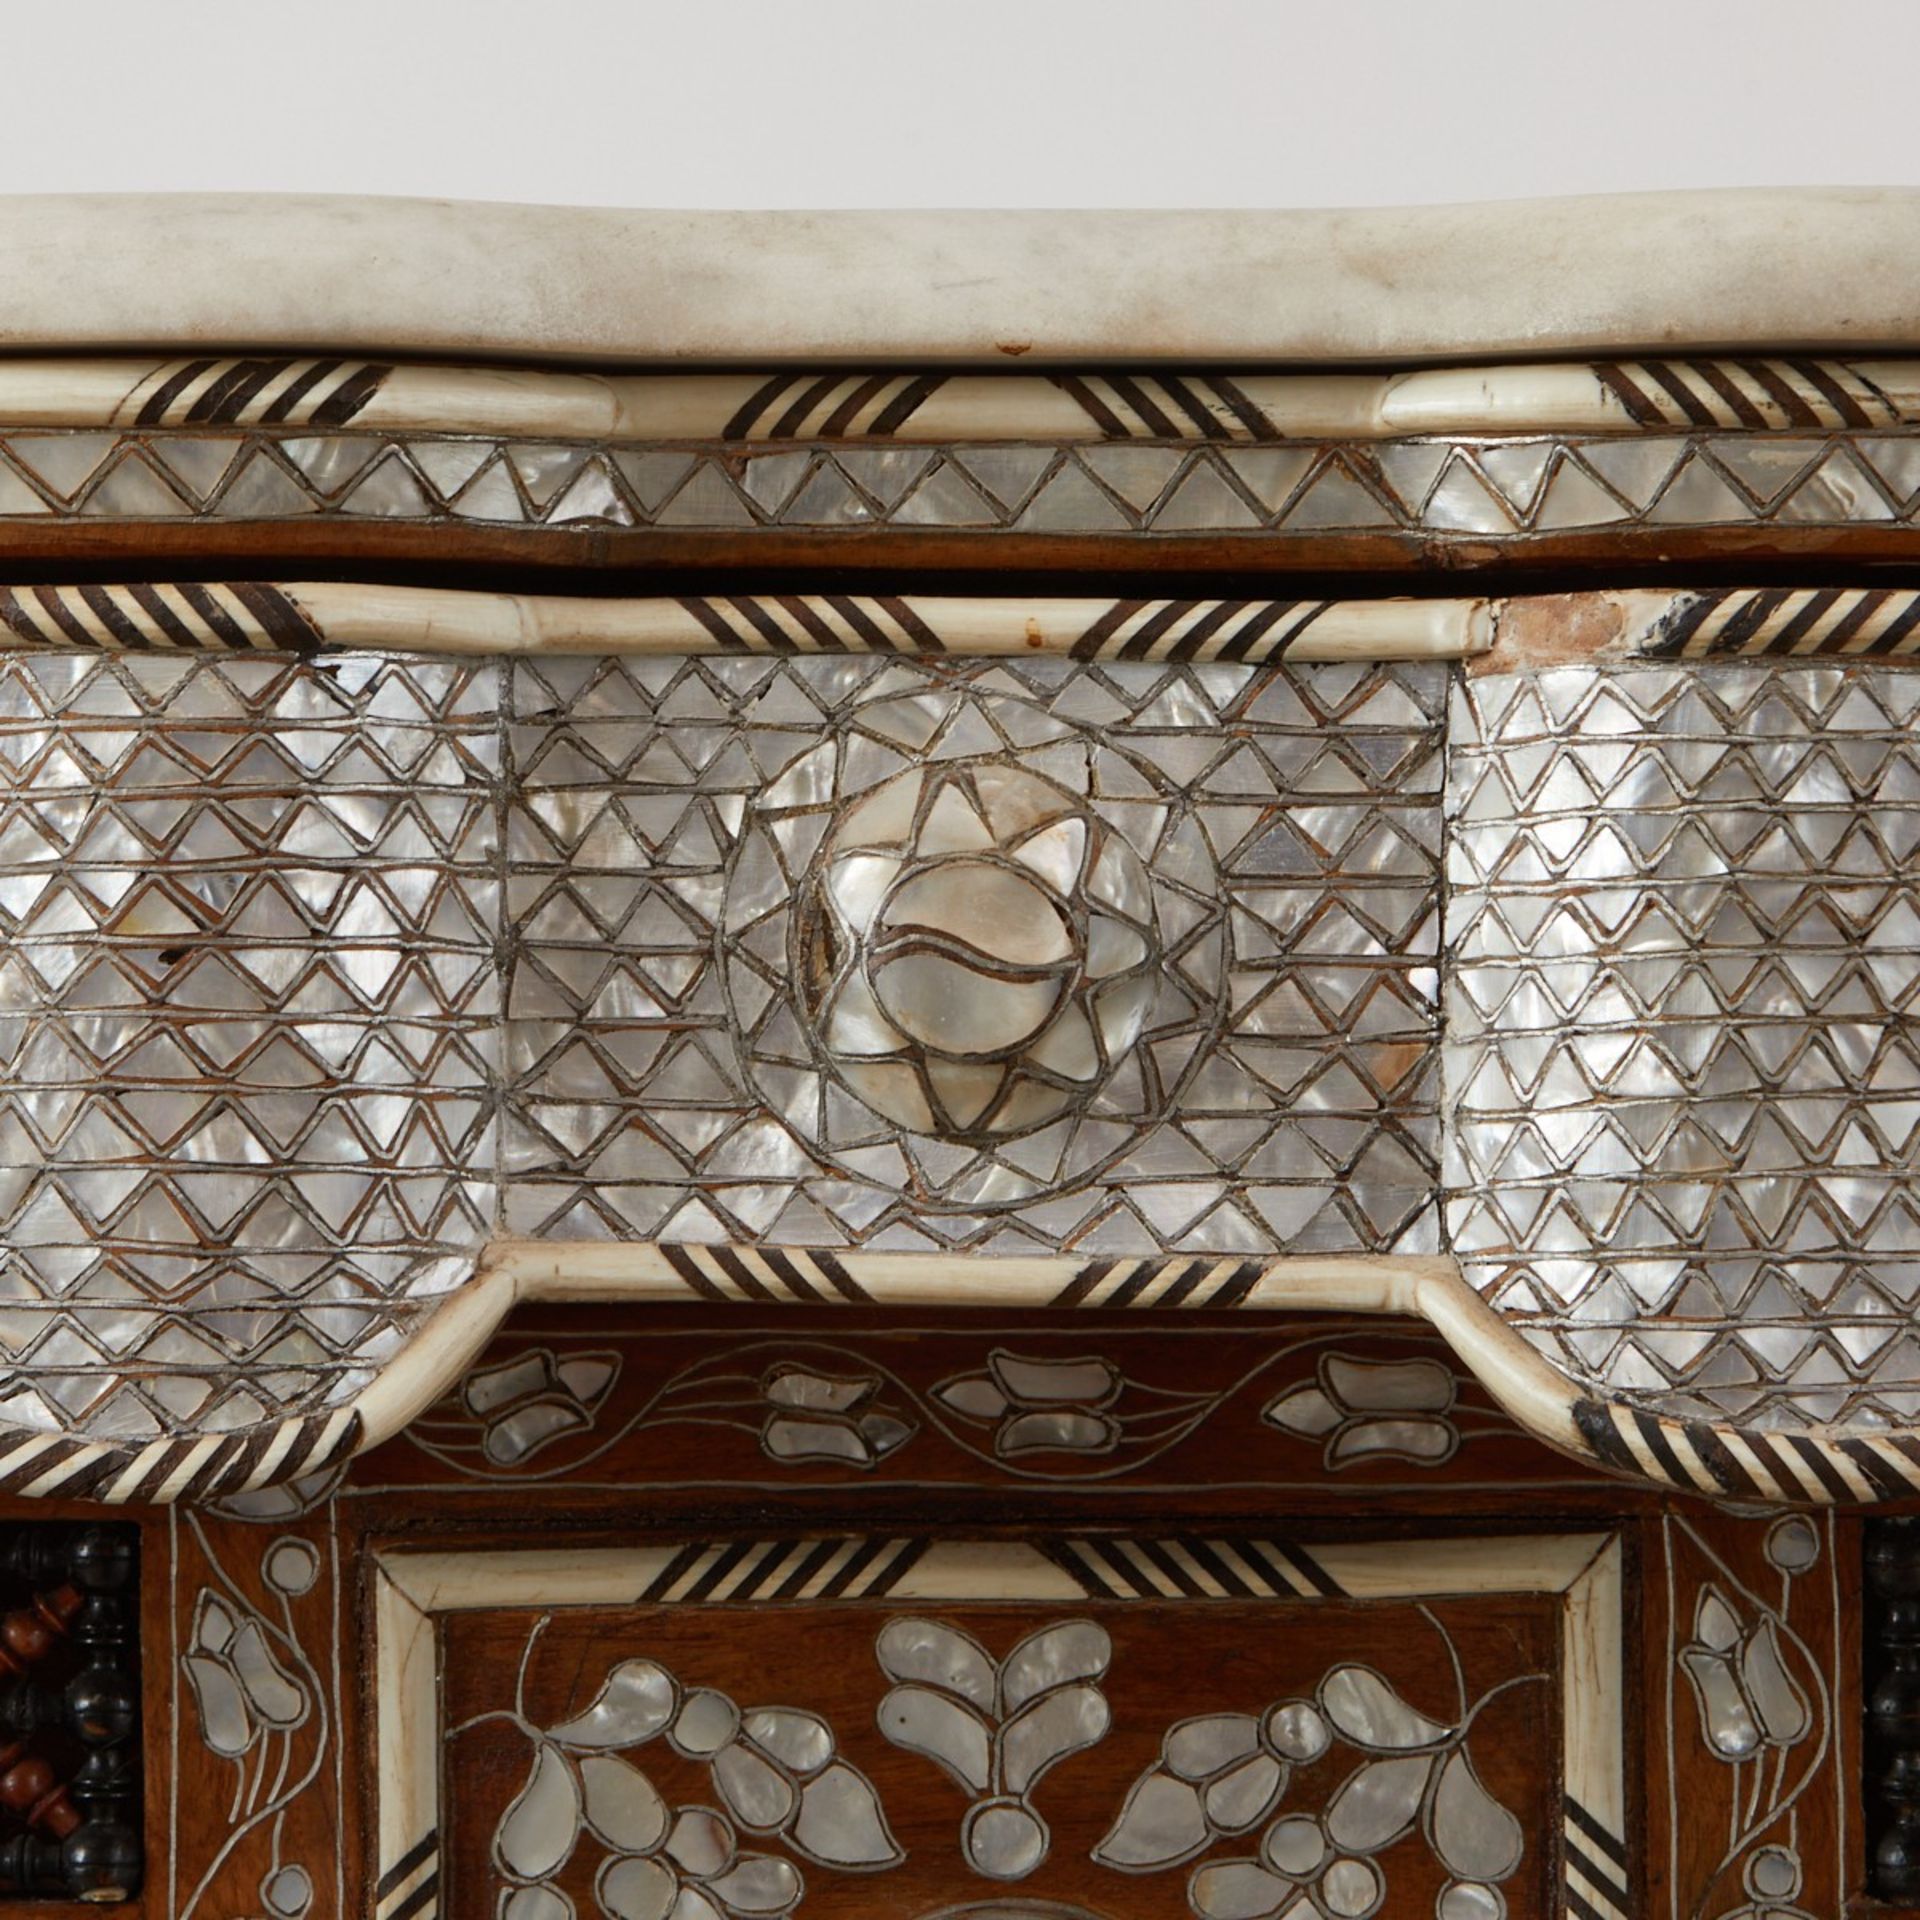 Levantine Mother of Pearl Inlaid Hall Table - Image 6 of 8